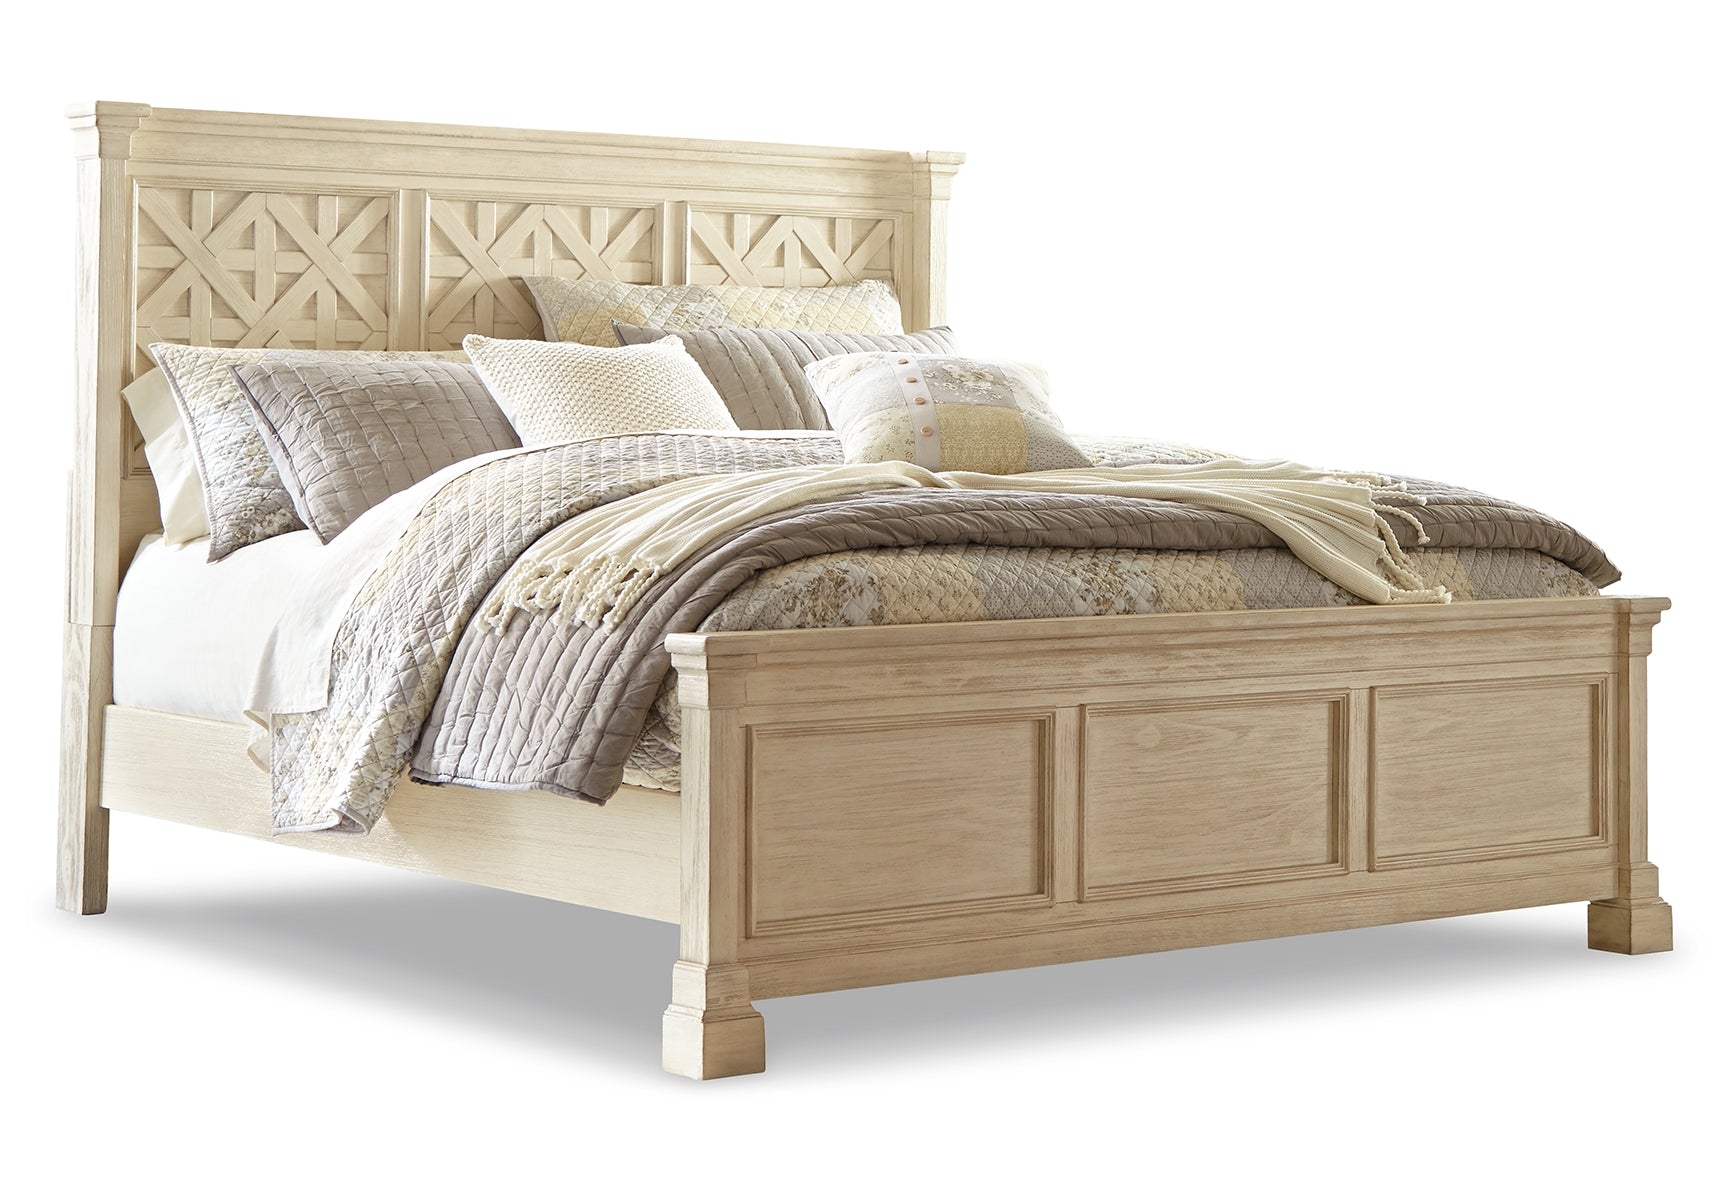 Bolanburg Bed with 2 Nightstands